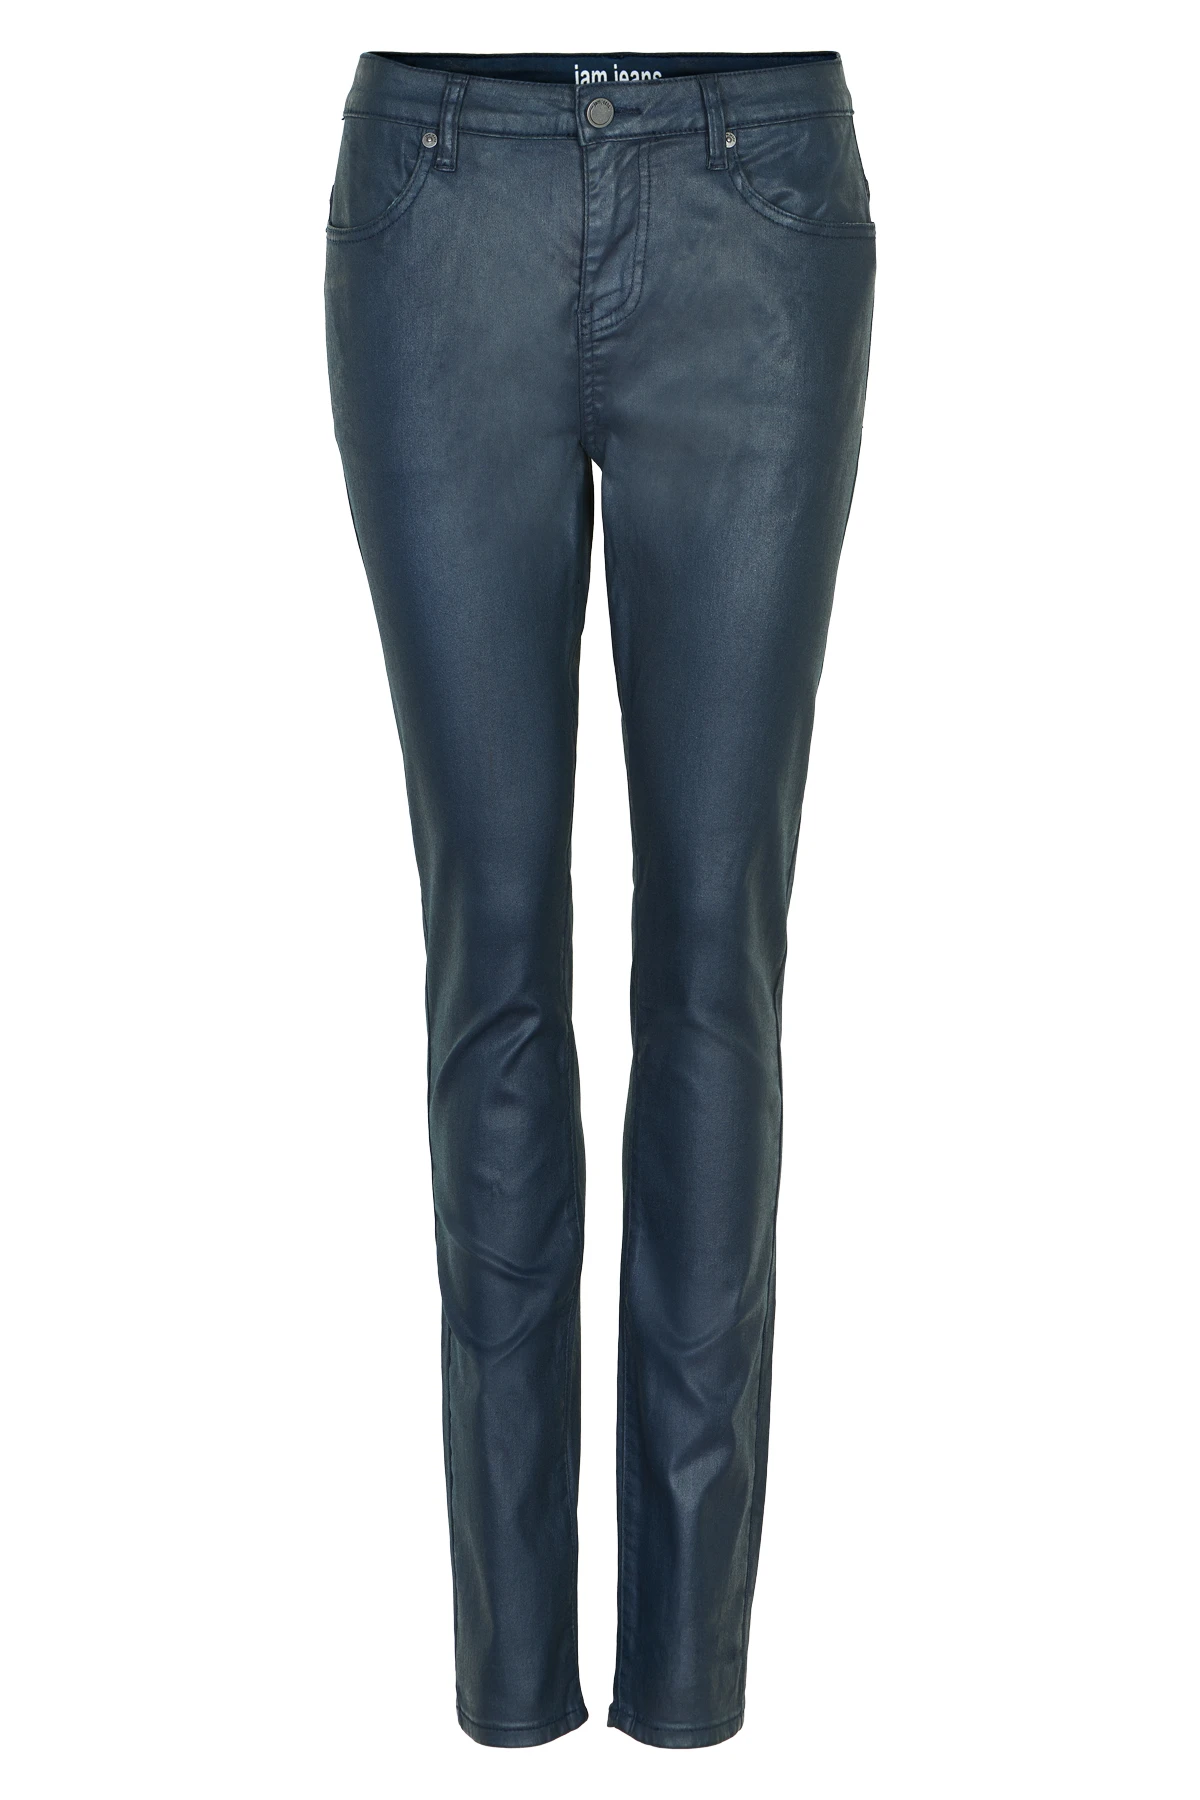 JAM Jeans outlet for women - up 55% - Shop here